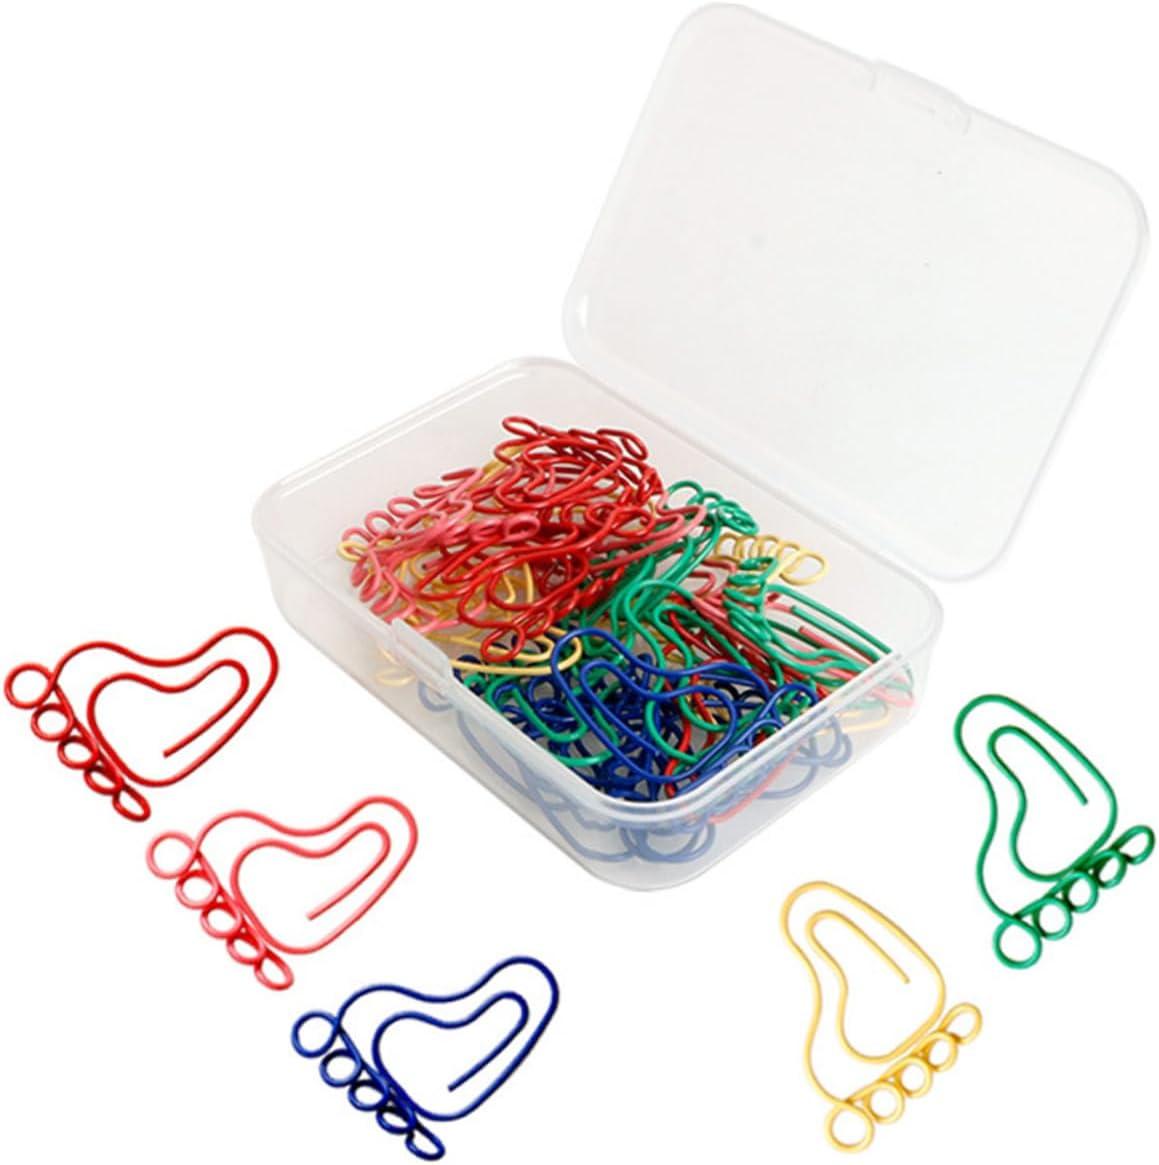 ohphcall paperclips large 30pcs little feet paper clip coated paper clips colored paper clips binder paper